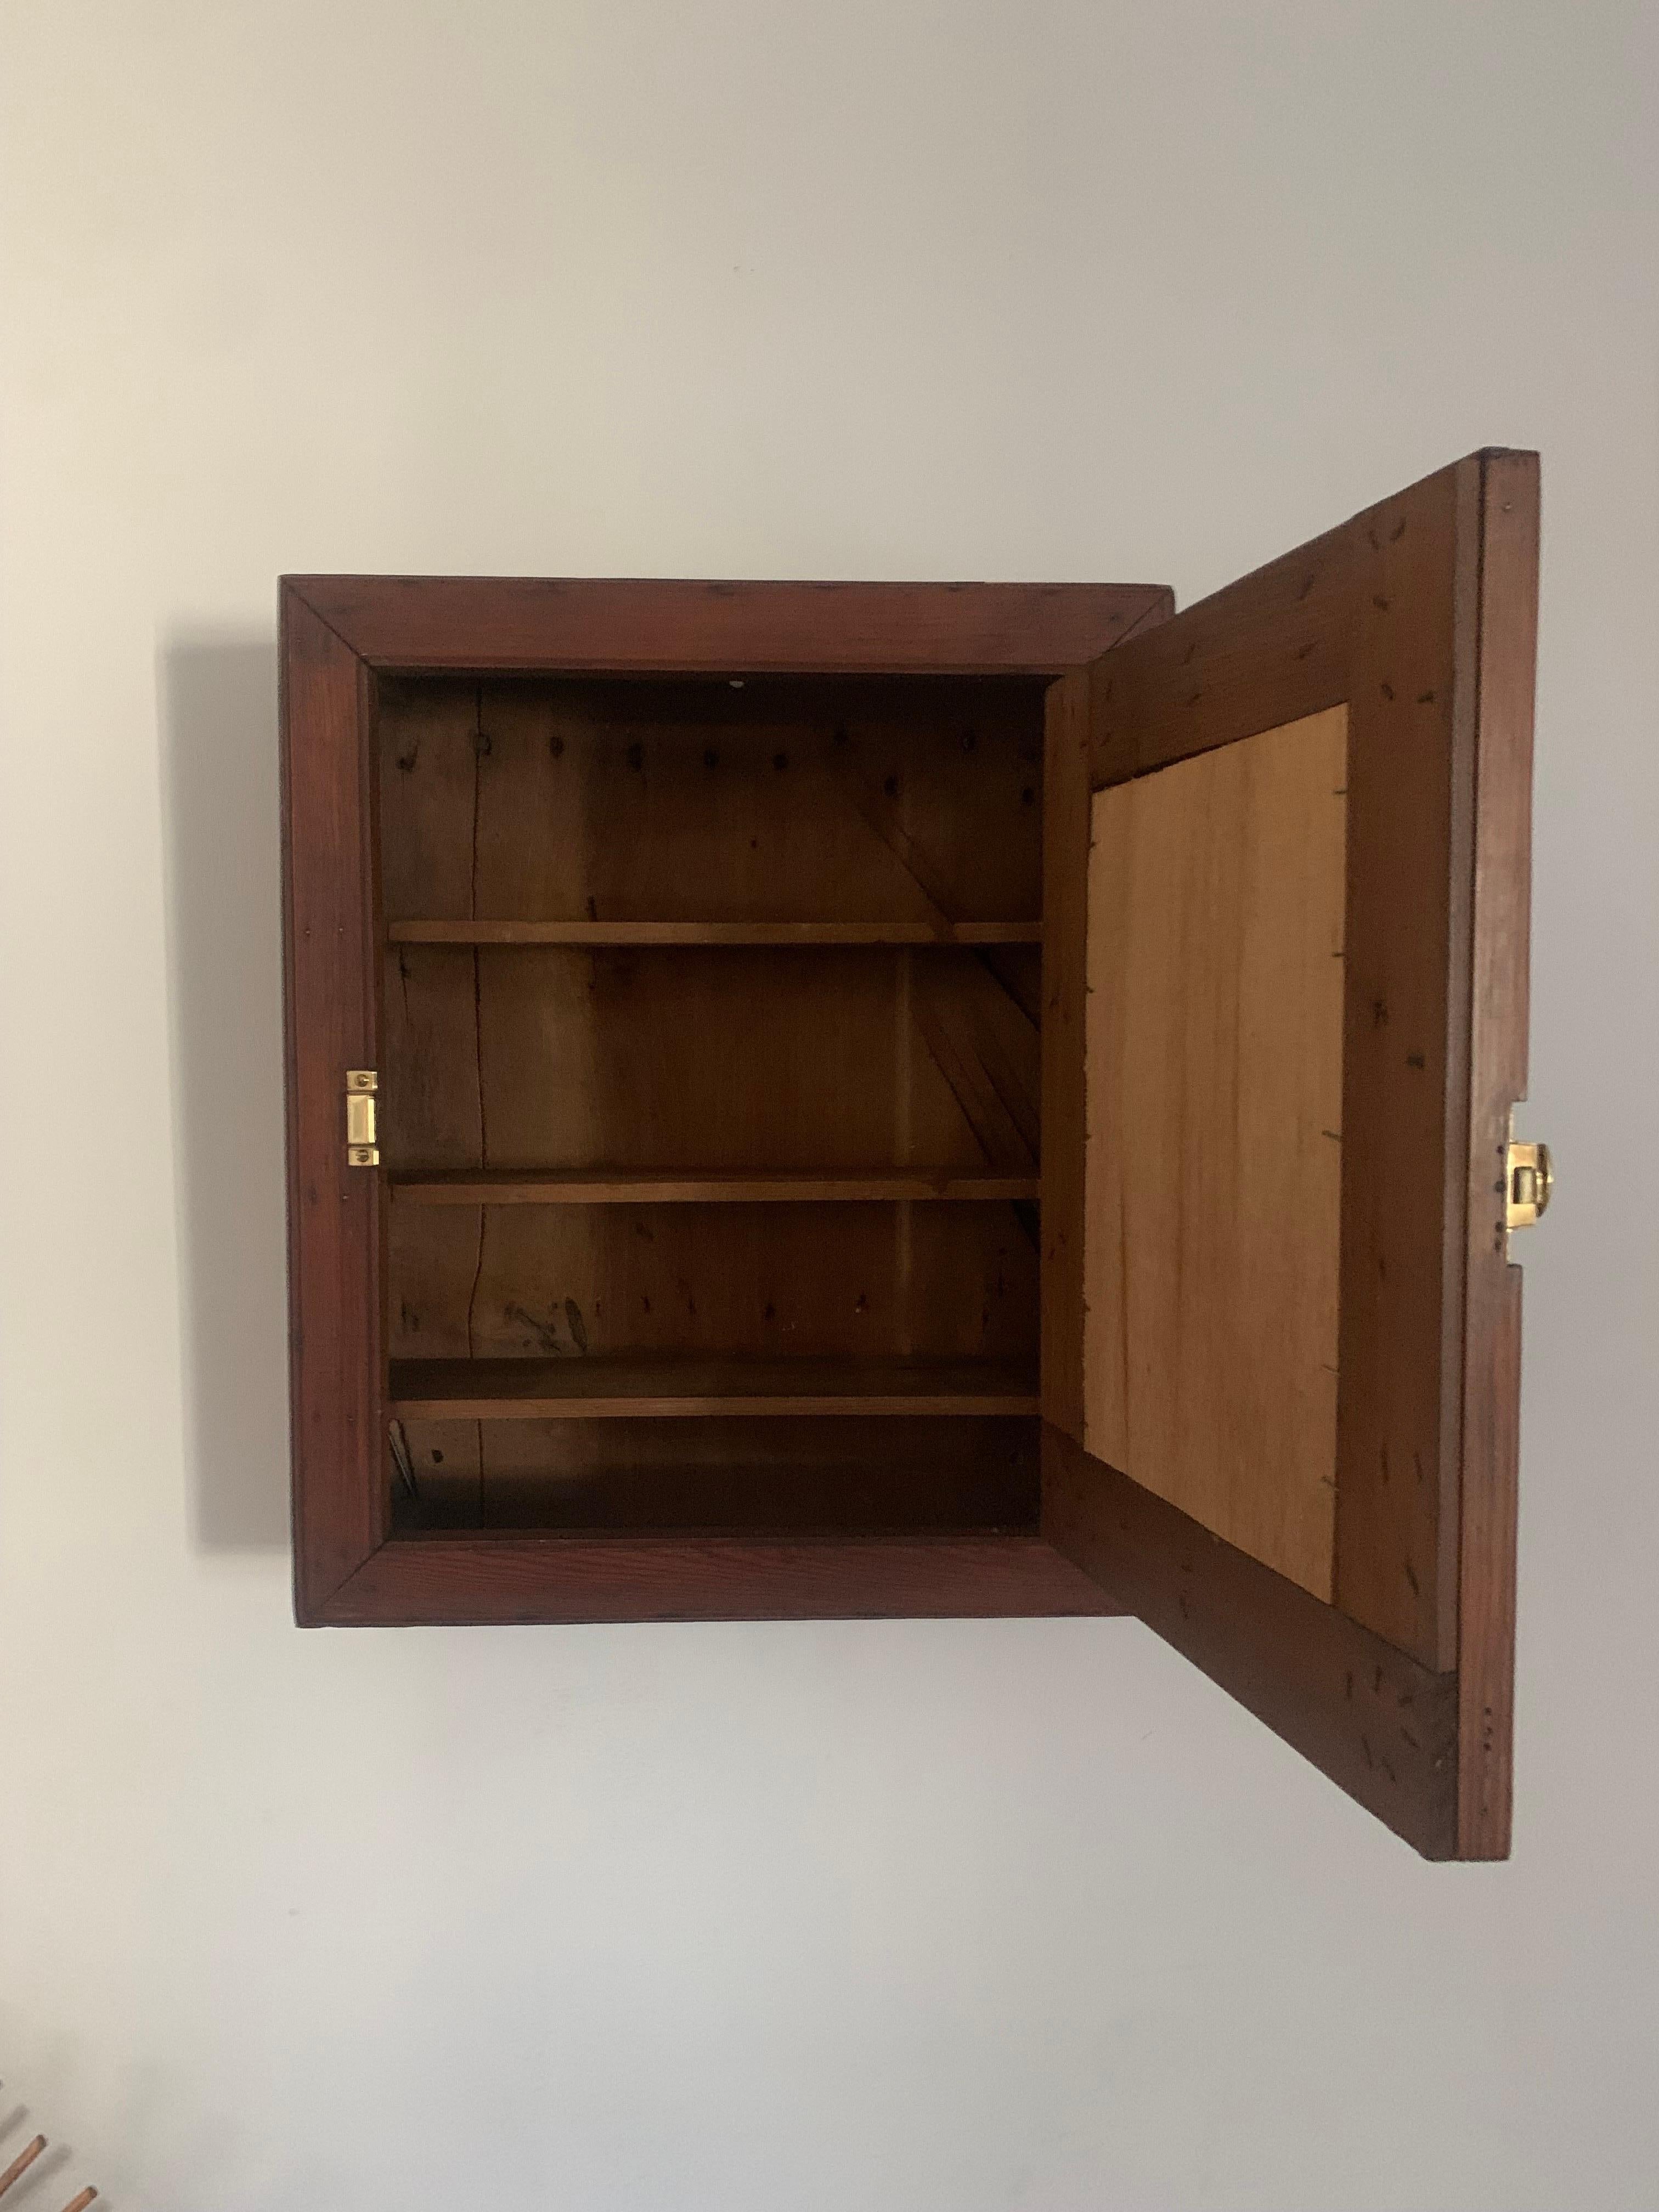 Antique 19th century pine medicine cabinet. Solid construction of thick old growth pine wood. 

At some point in its long life it was refinished however that finish has aged beautifully. 

Tasteful patina throughout and retains a solid structure.